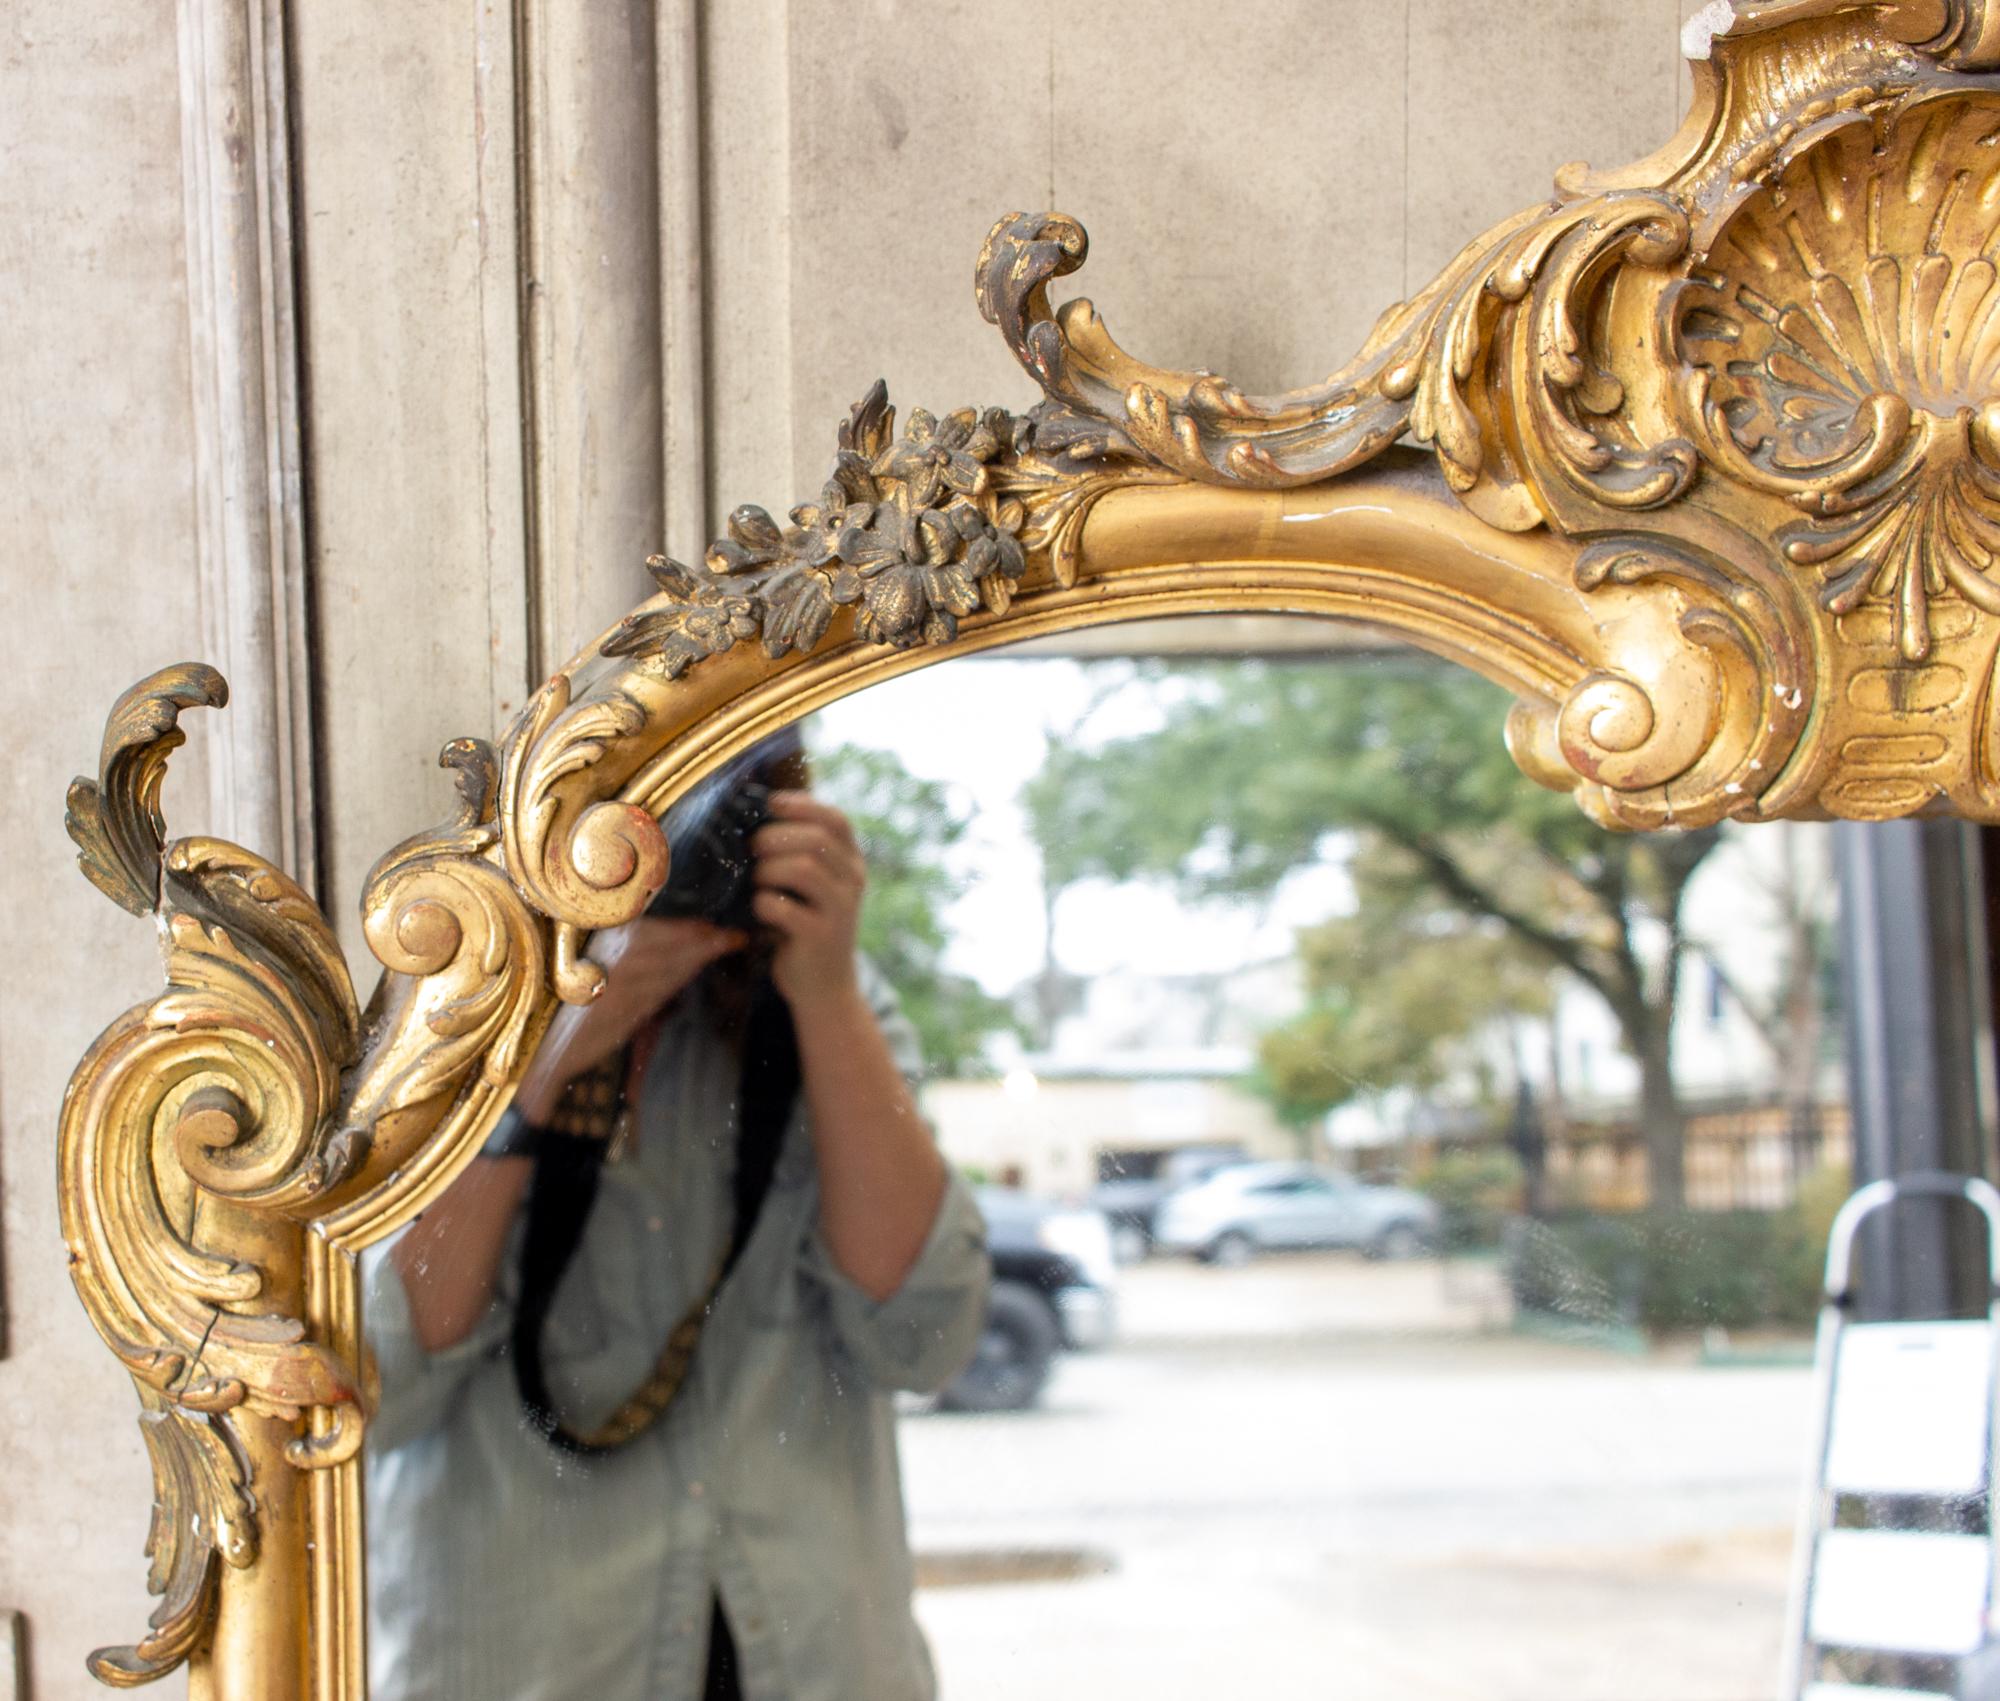 Hand-Carved Antique Gilt Full-Length Mirror with Decorative Carvings and Shell Cartouche